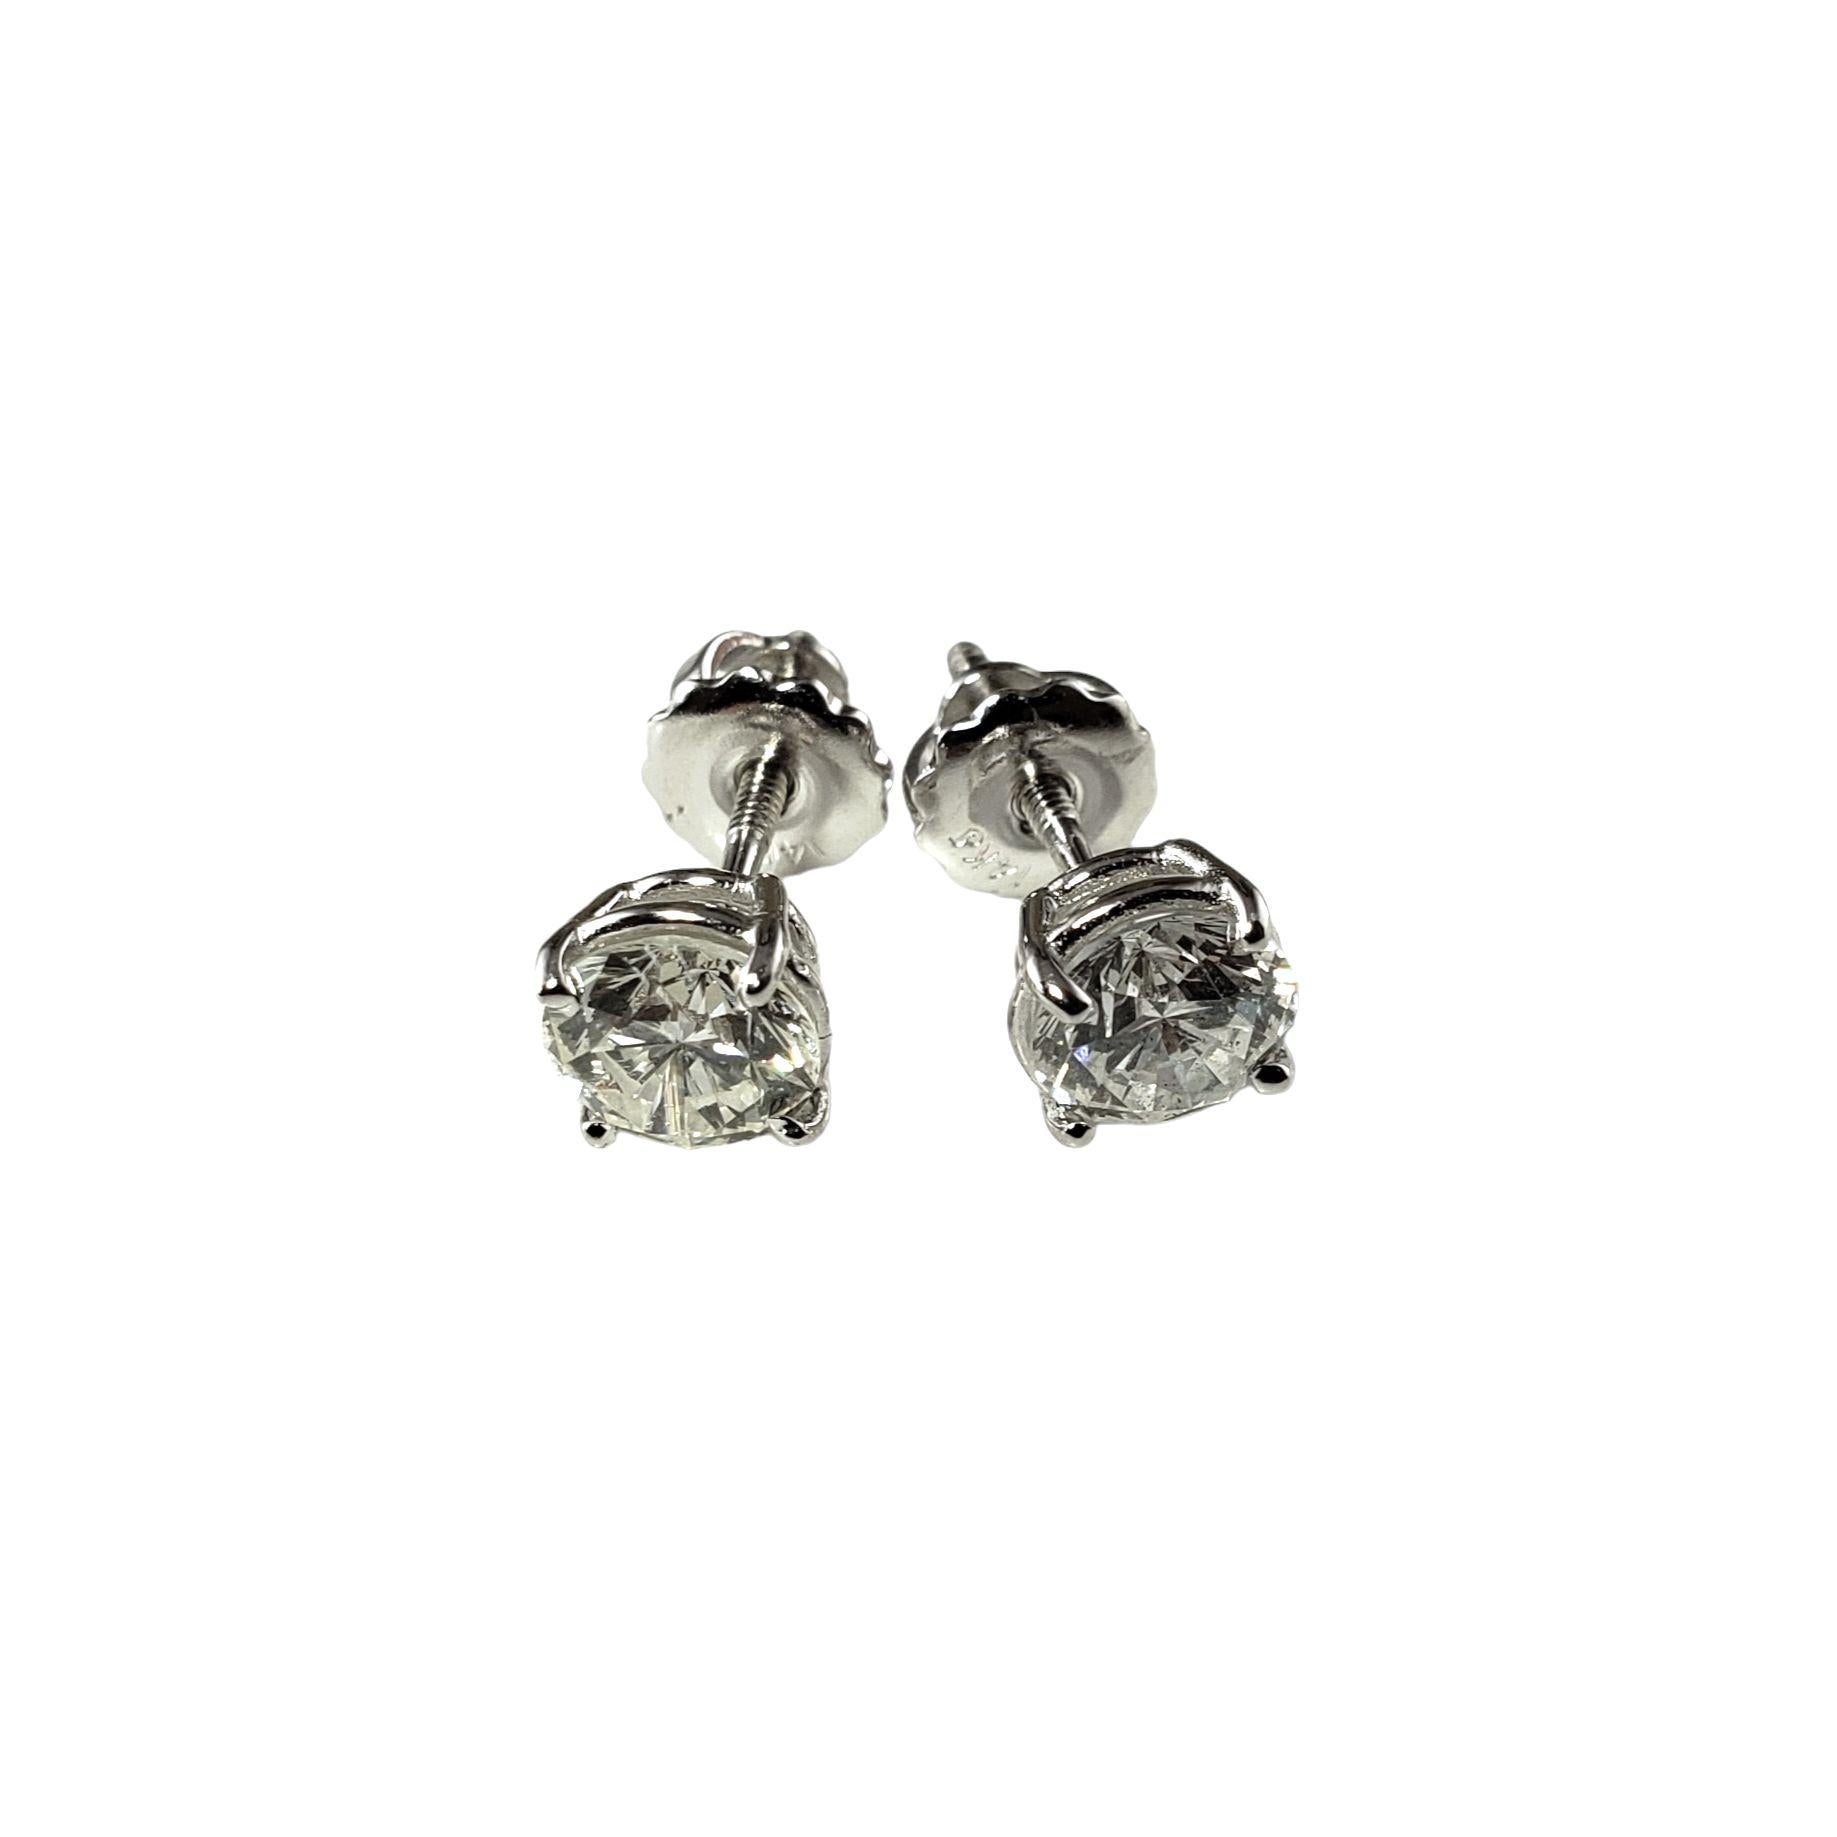 Vintage 14 Karat White Gold Diamond Stud Earrings 1.29 TCW.  JAGi Certified-

These sparkling earrings each feature one round brilliant cut diamond set in classic 14K white gold.  Screw back closures.

Total diamond weight: 1.29 ct.

Diamond color: 